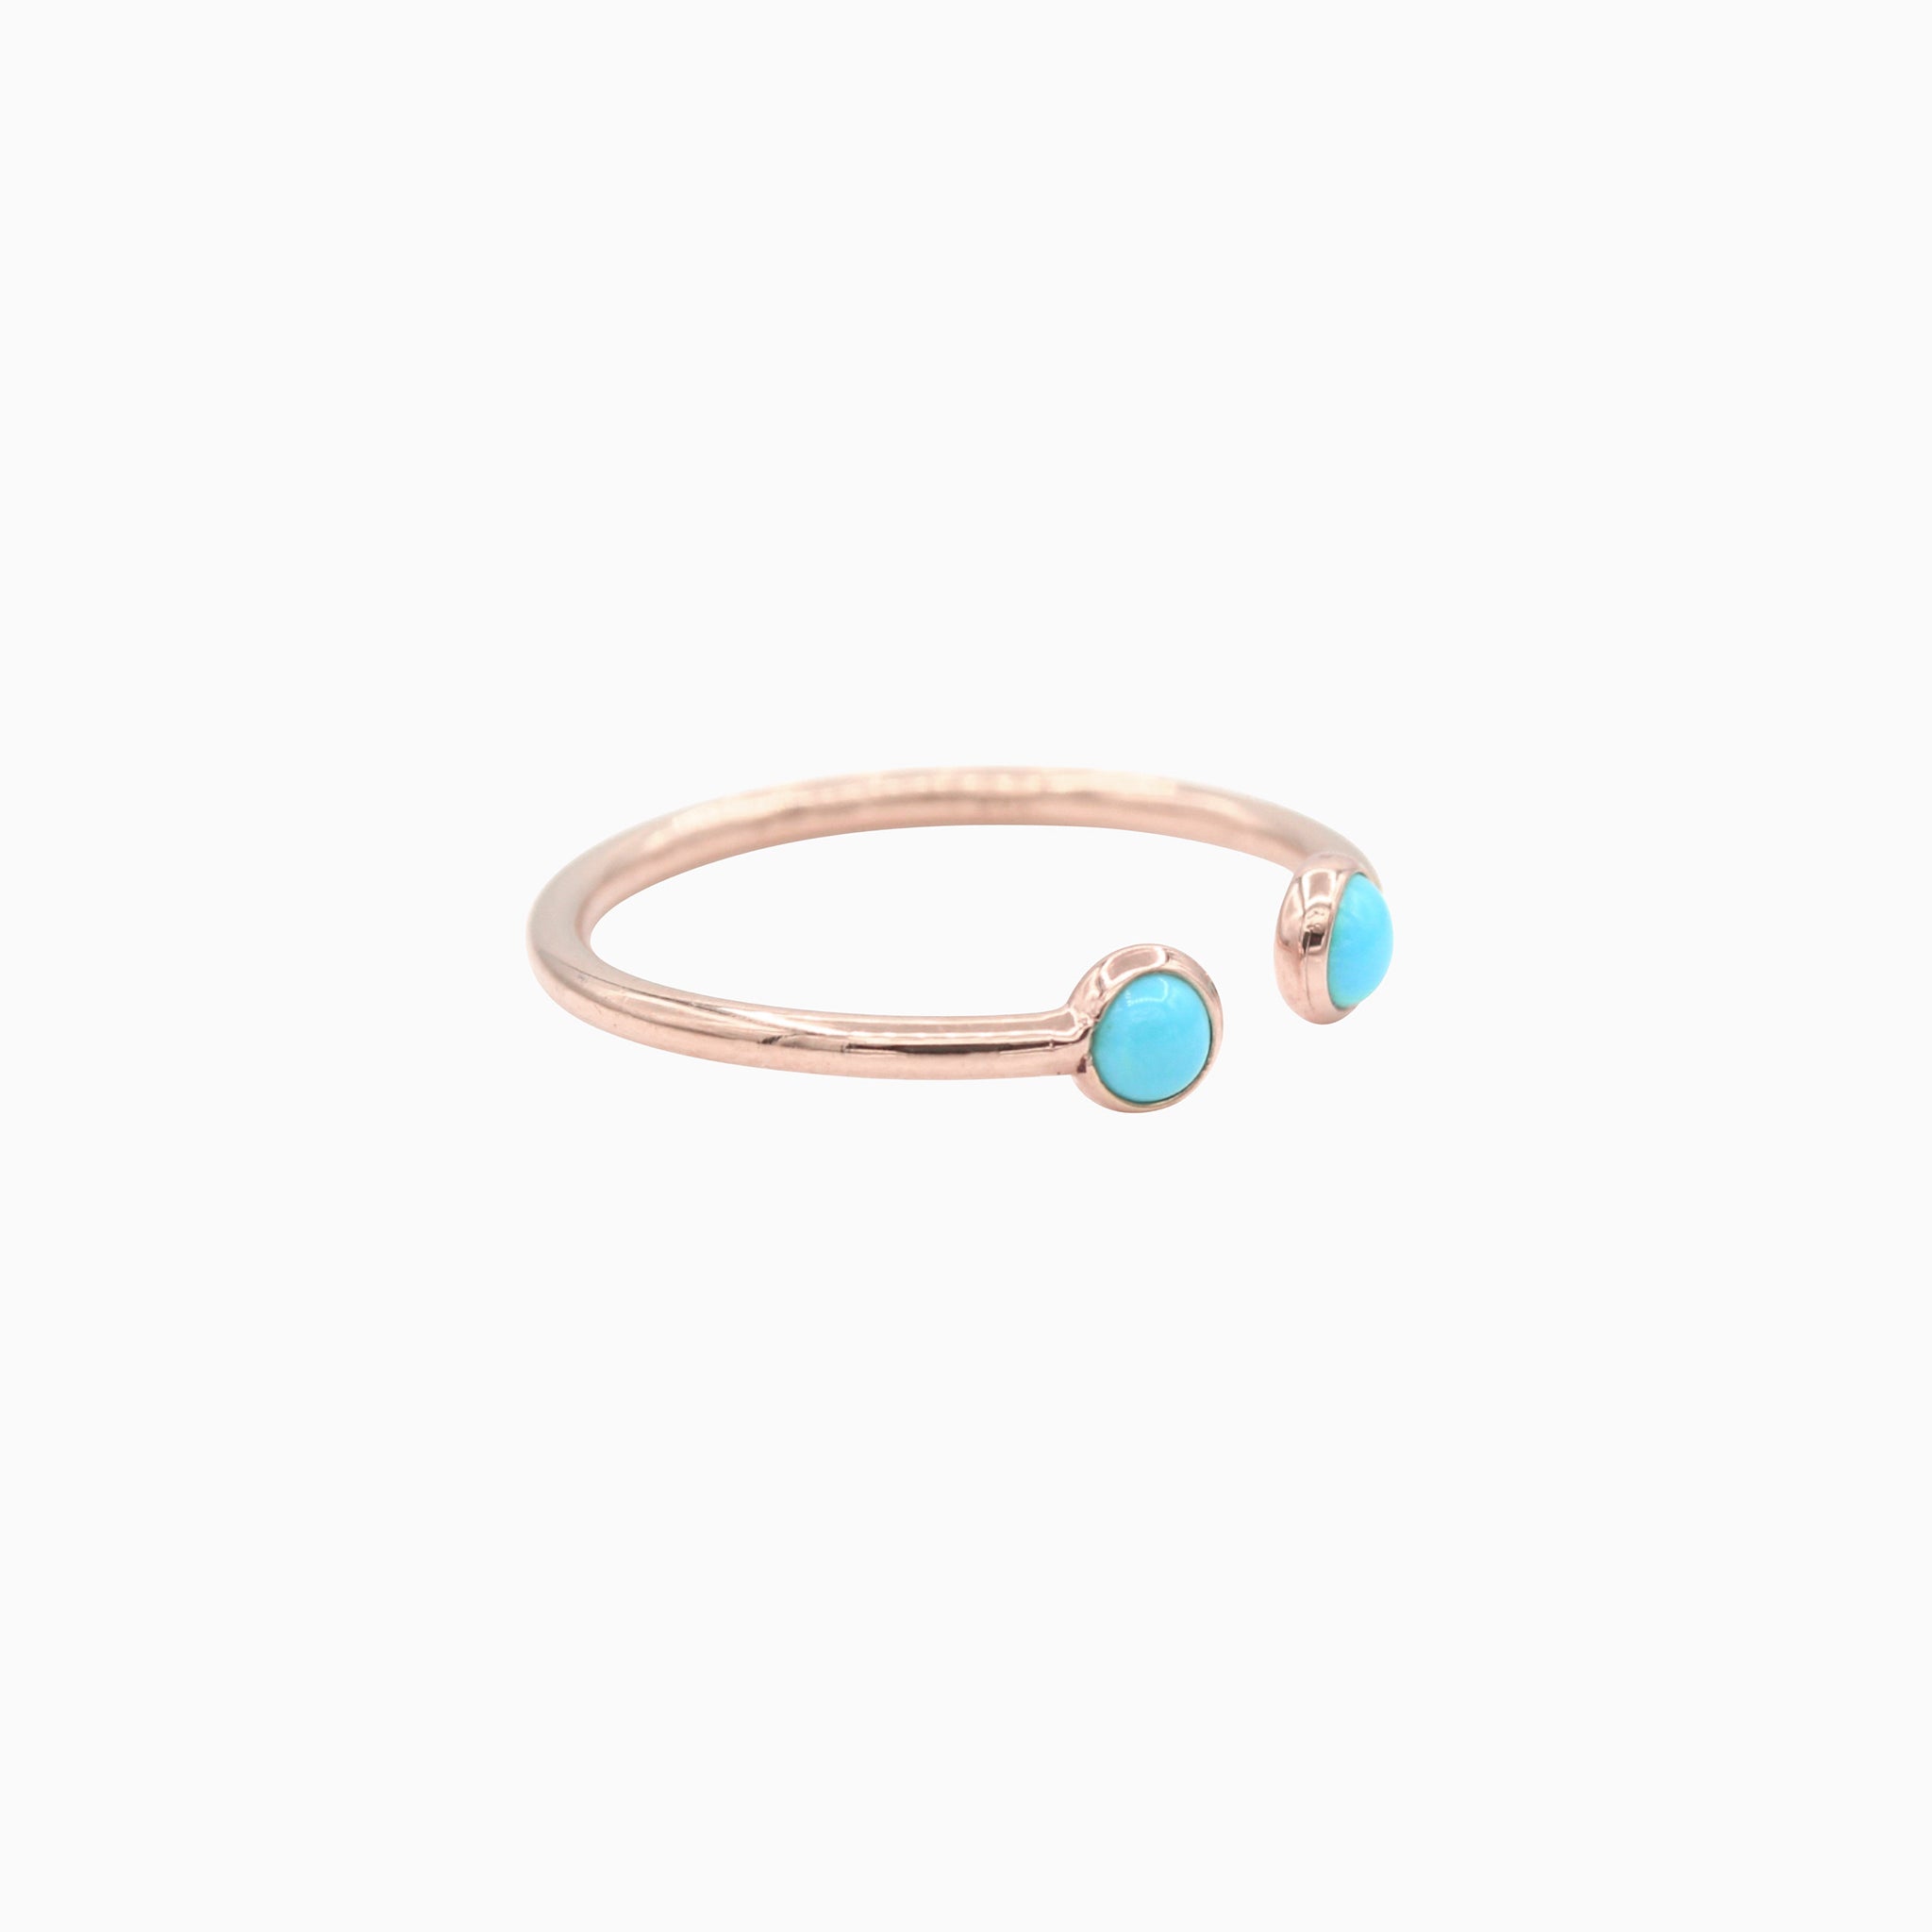 14k Rose Gold Cabochon Turquoise Open Ring, side view from left